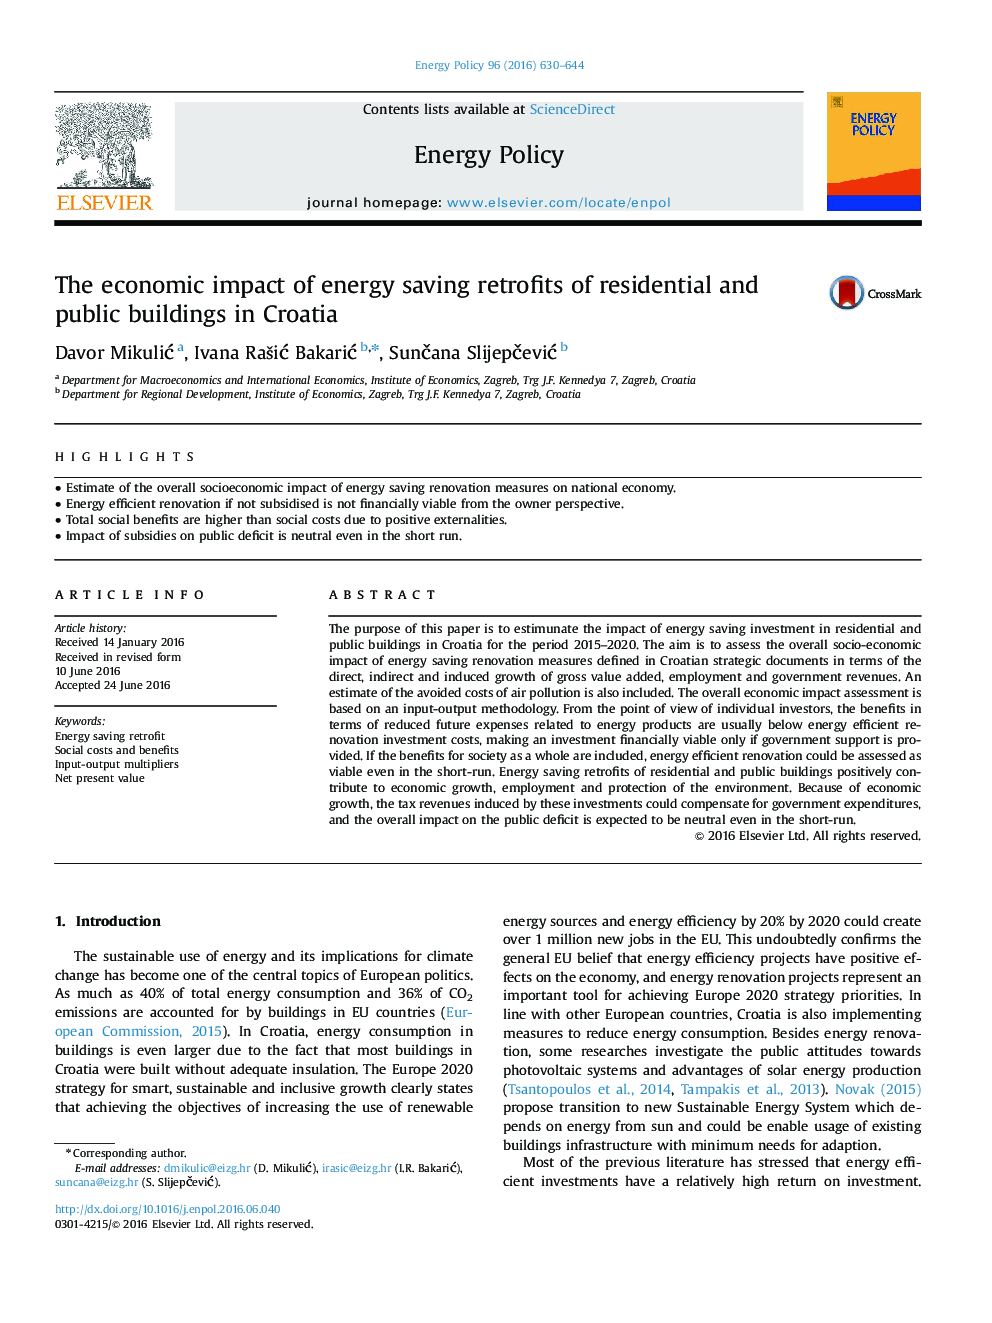 The economic impact of energy saving retrofits of residential and public buildings in Croatia